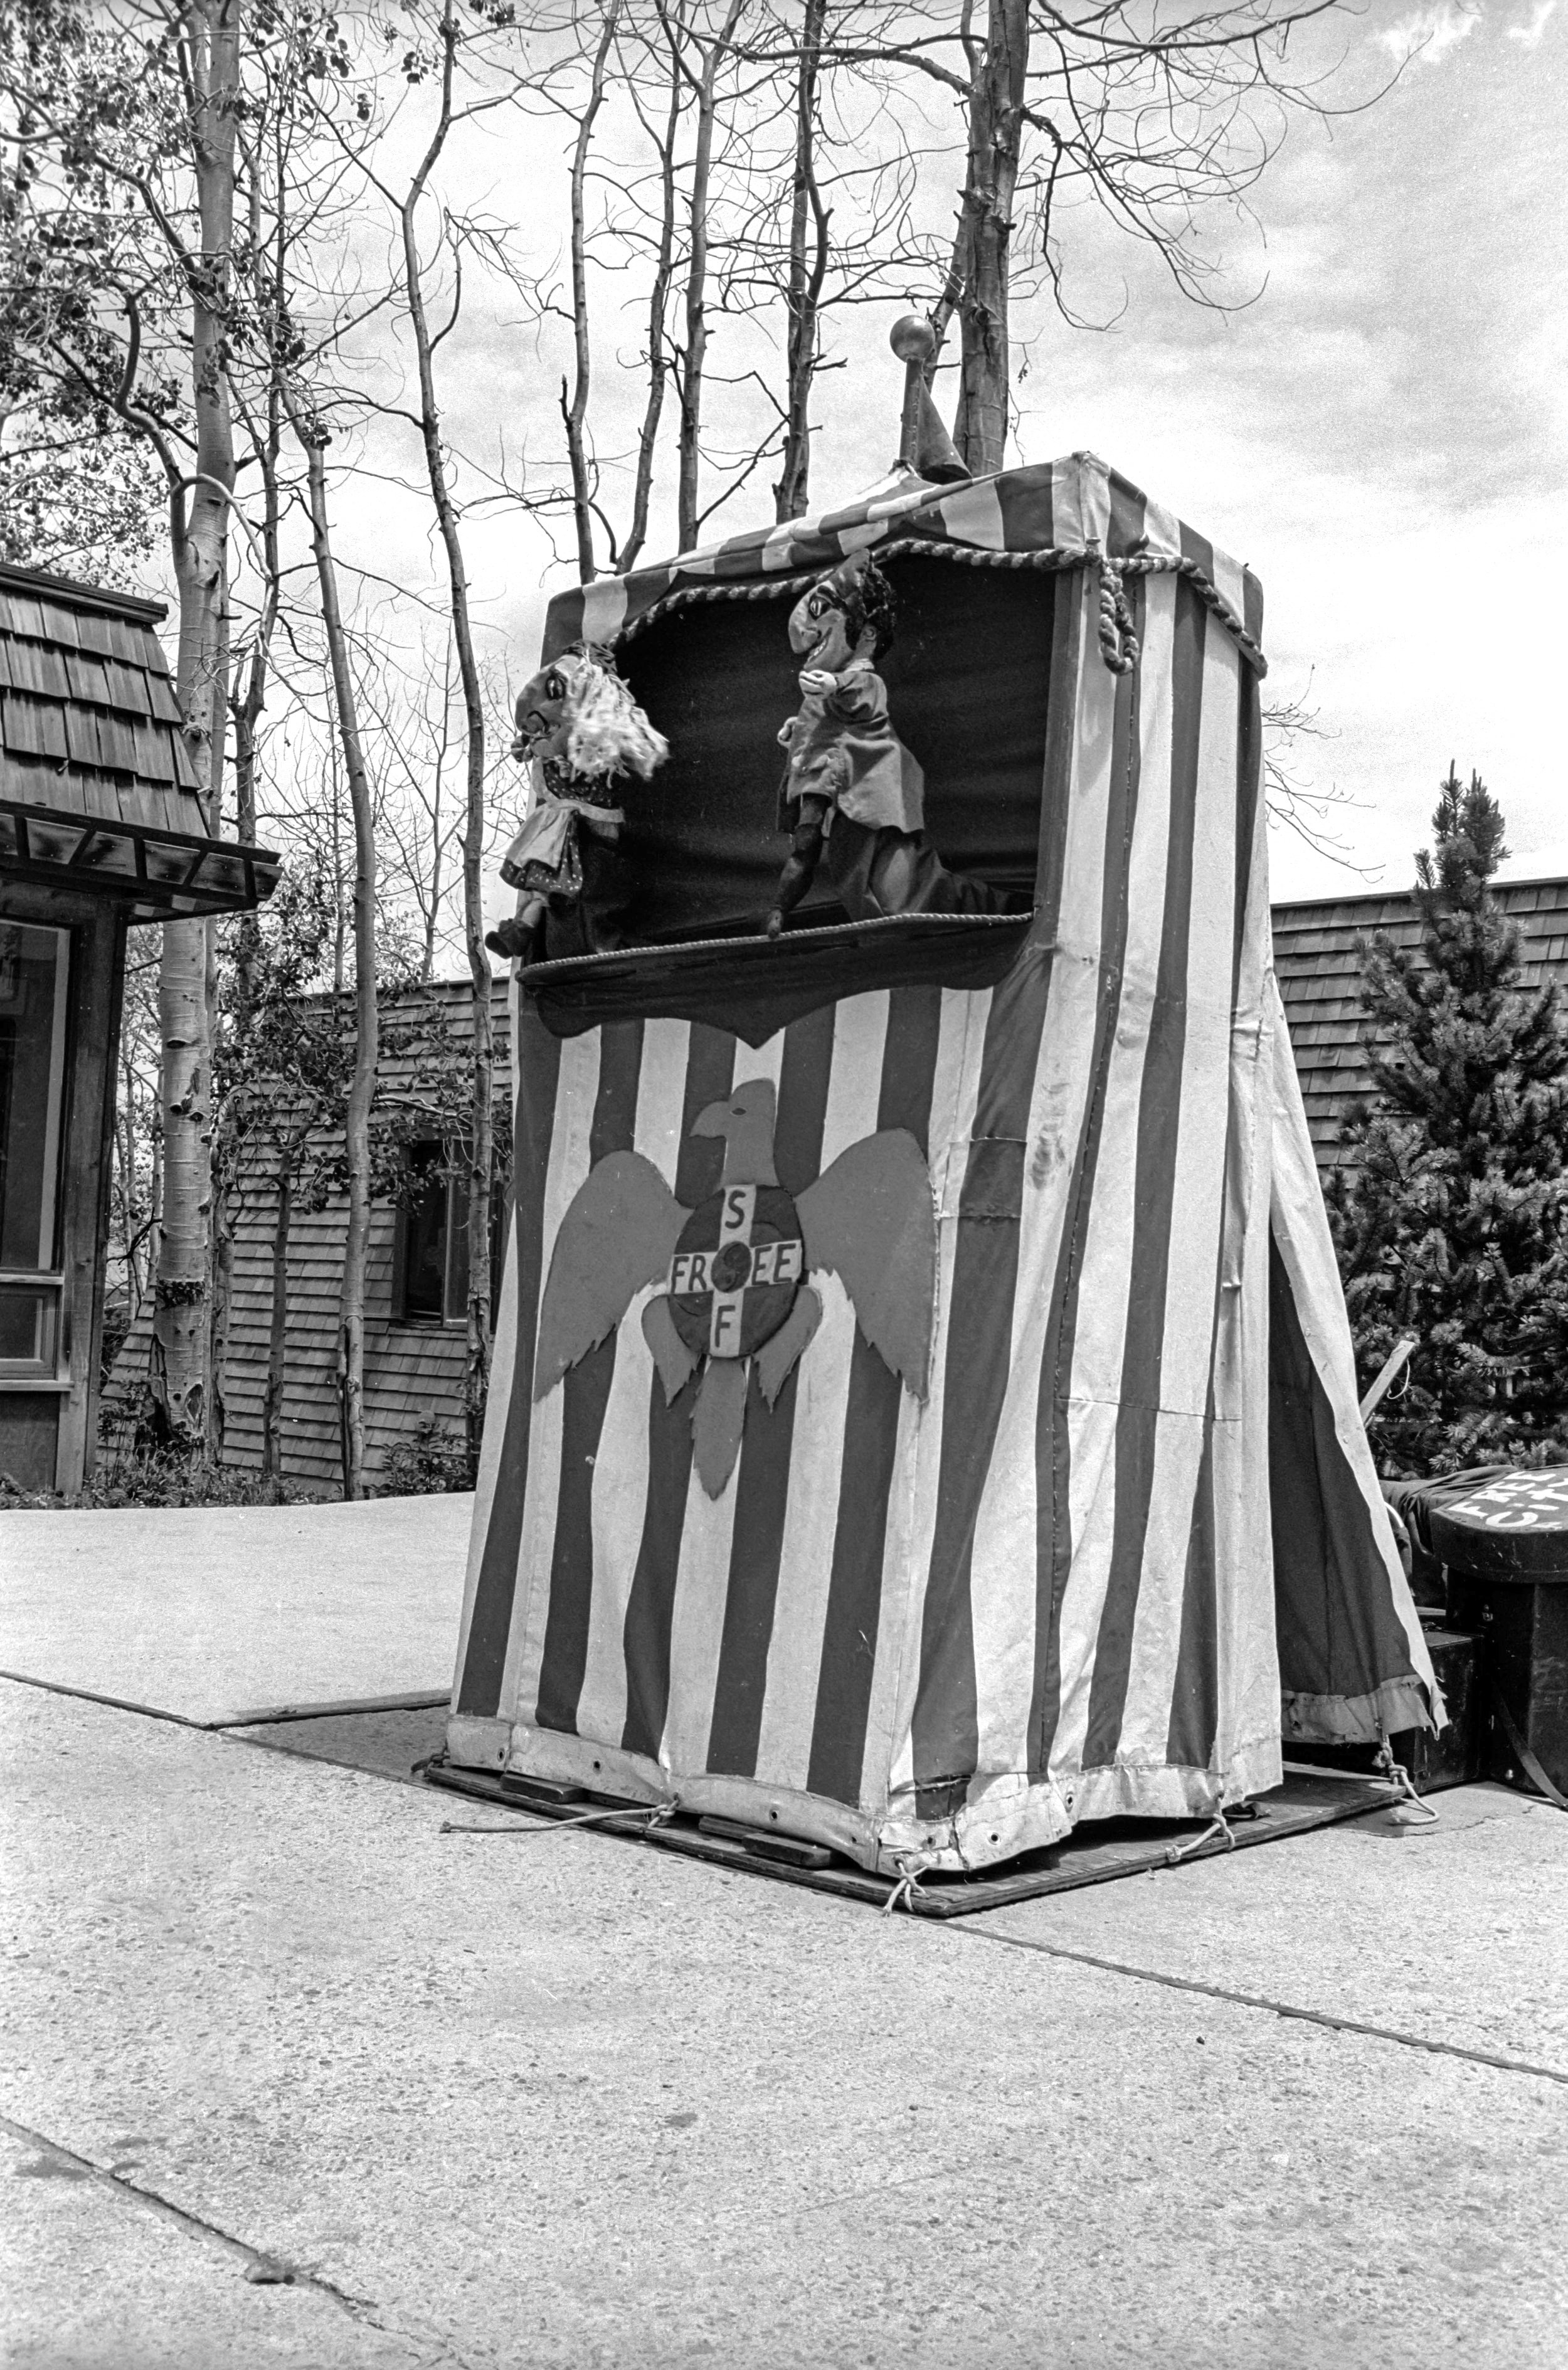   Punch and Judy, Glenwood Springs, CO, 1972  